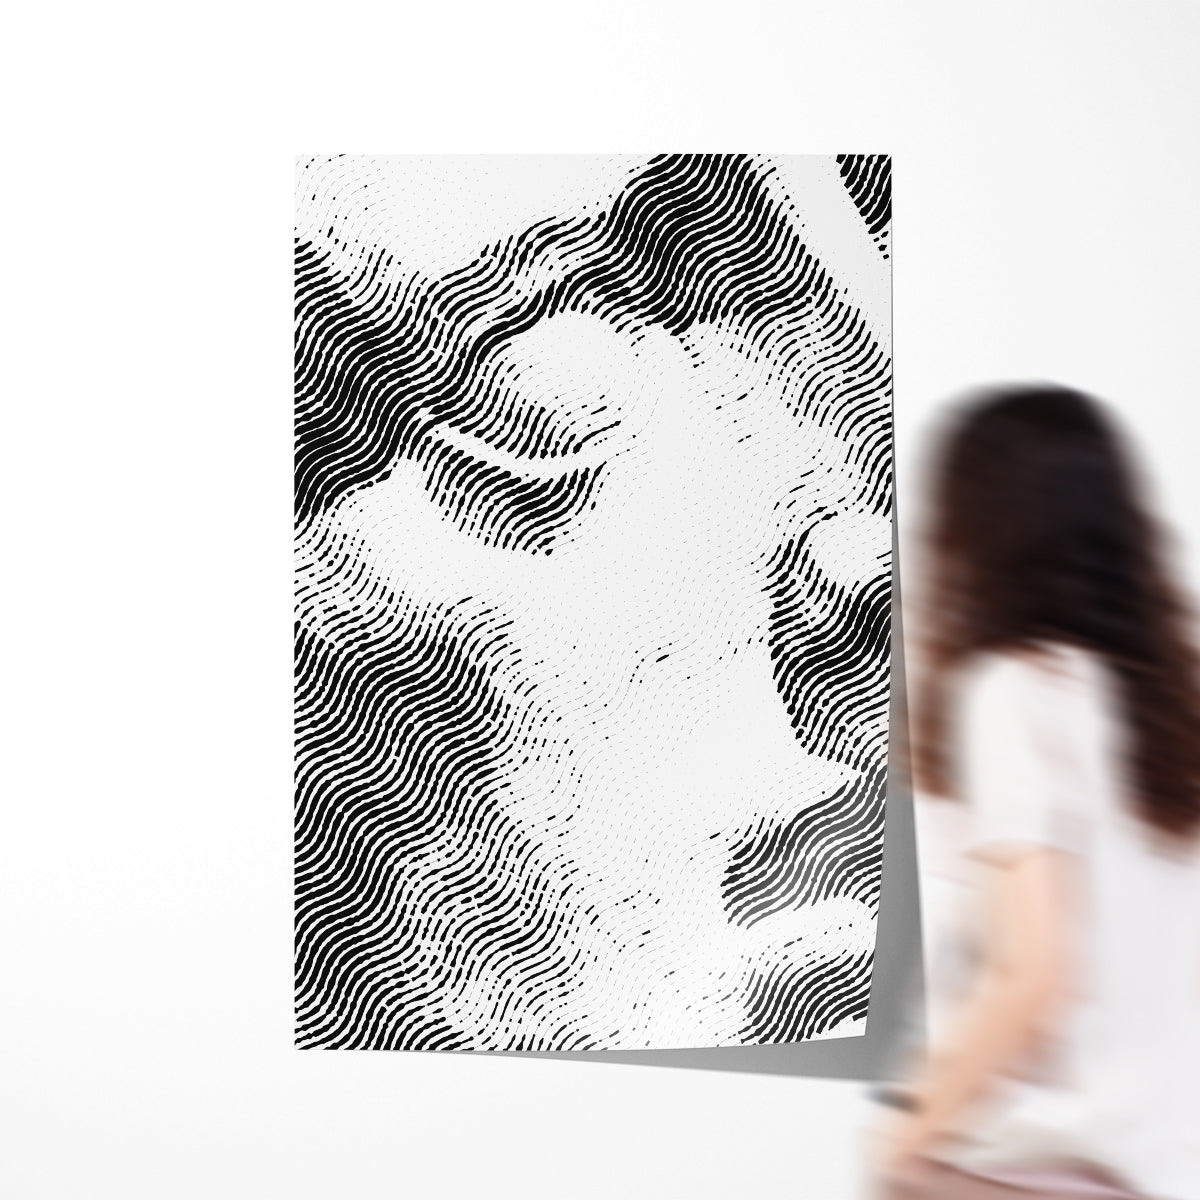 Ancient Greek Minimalist Portrait Black And White Poster Art Decor-Vertical Posters NOT FRAMED-CetArt-8″x10″ inches-CetArt